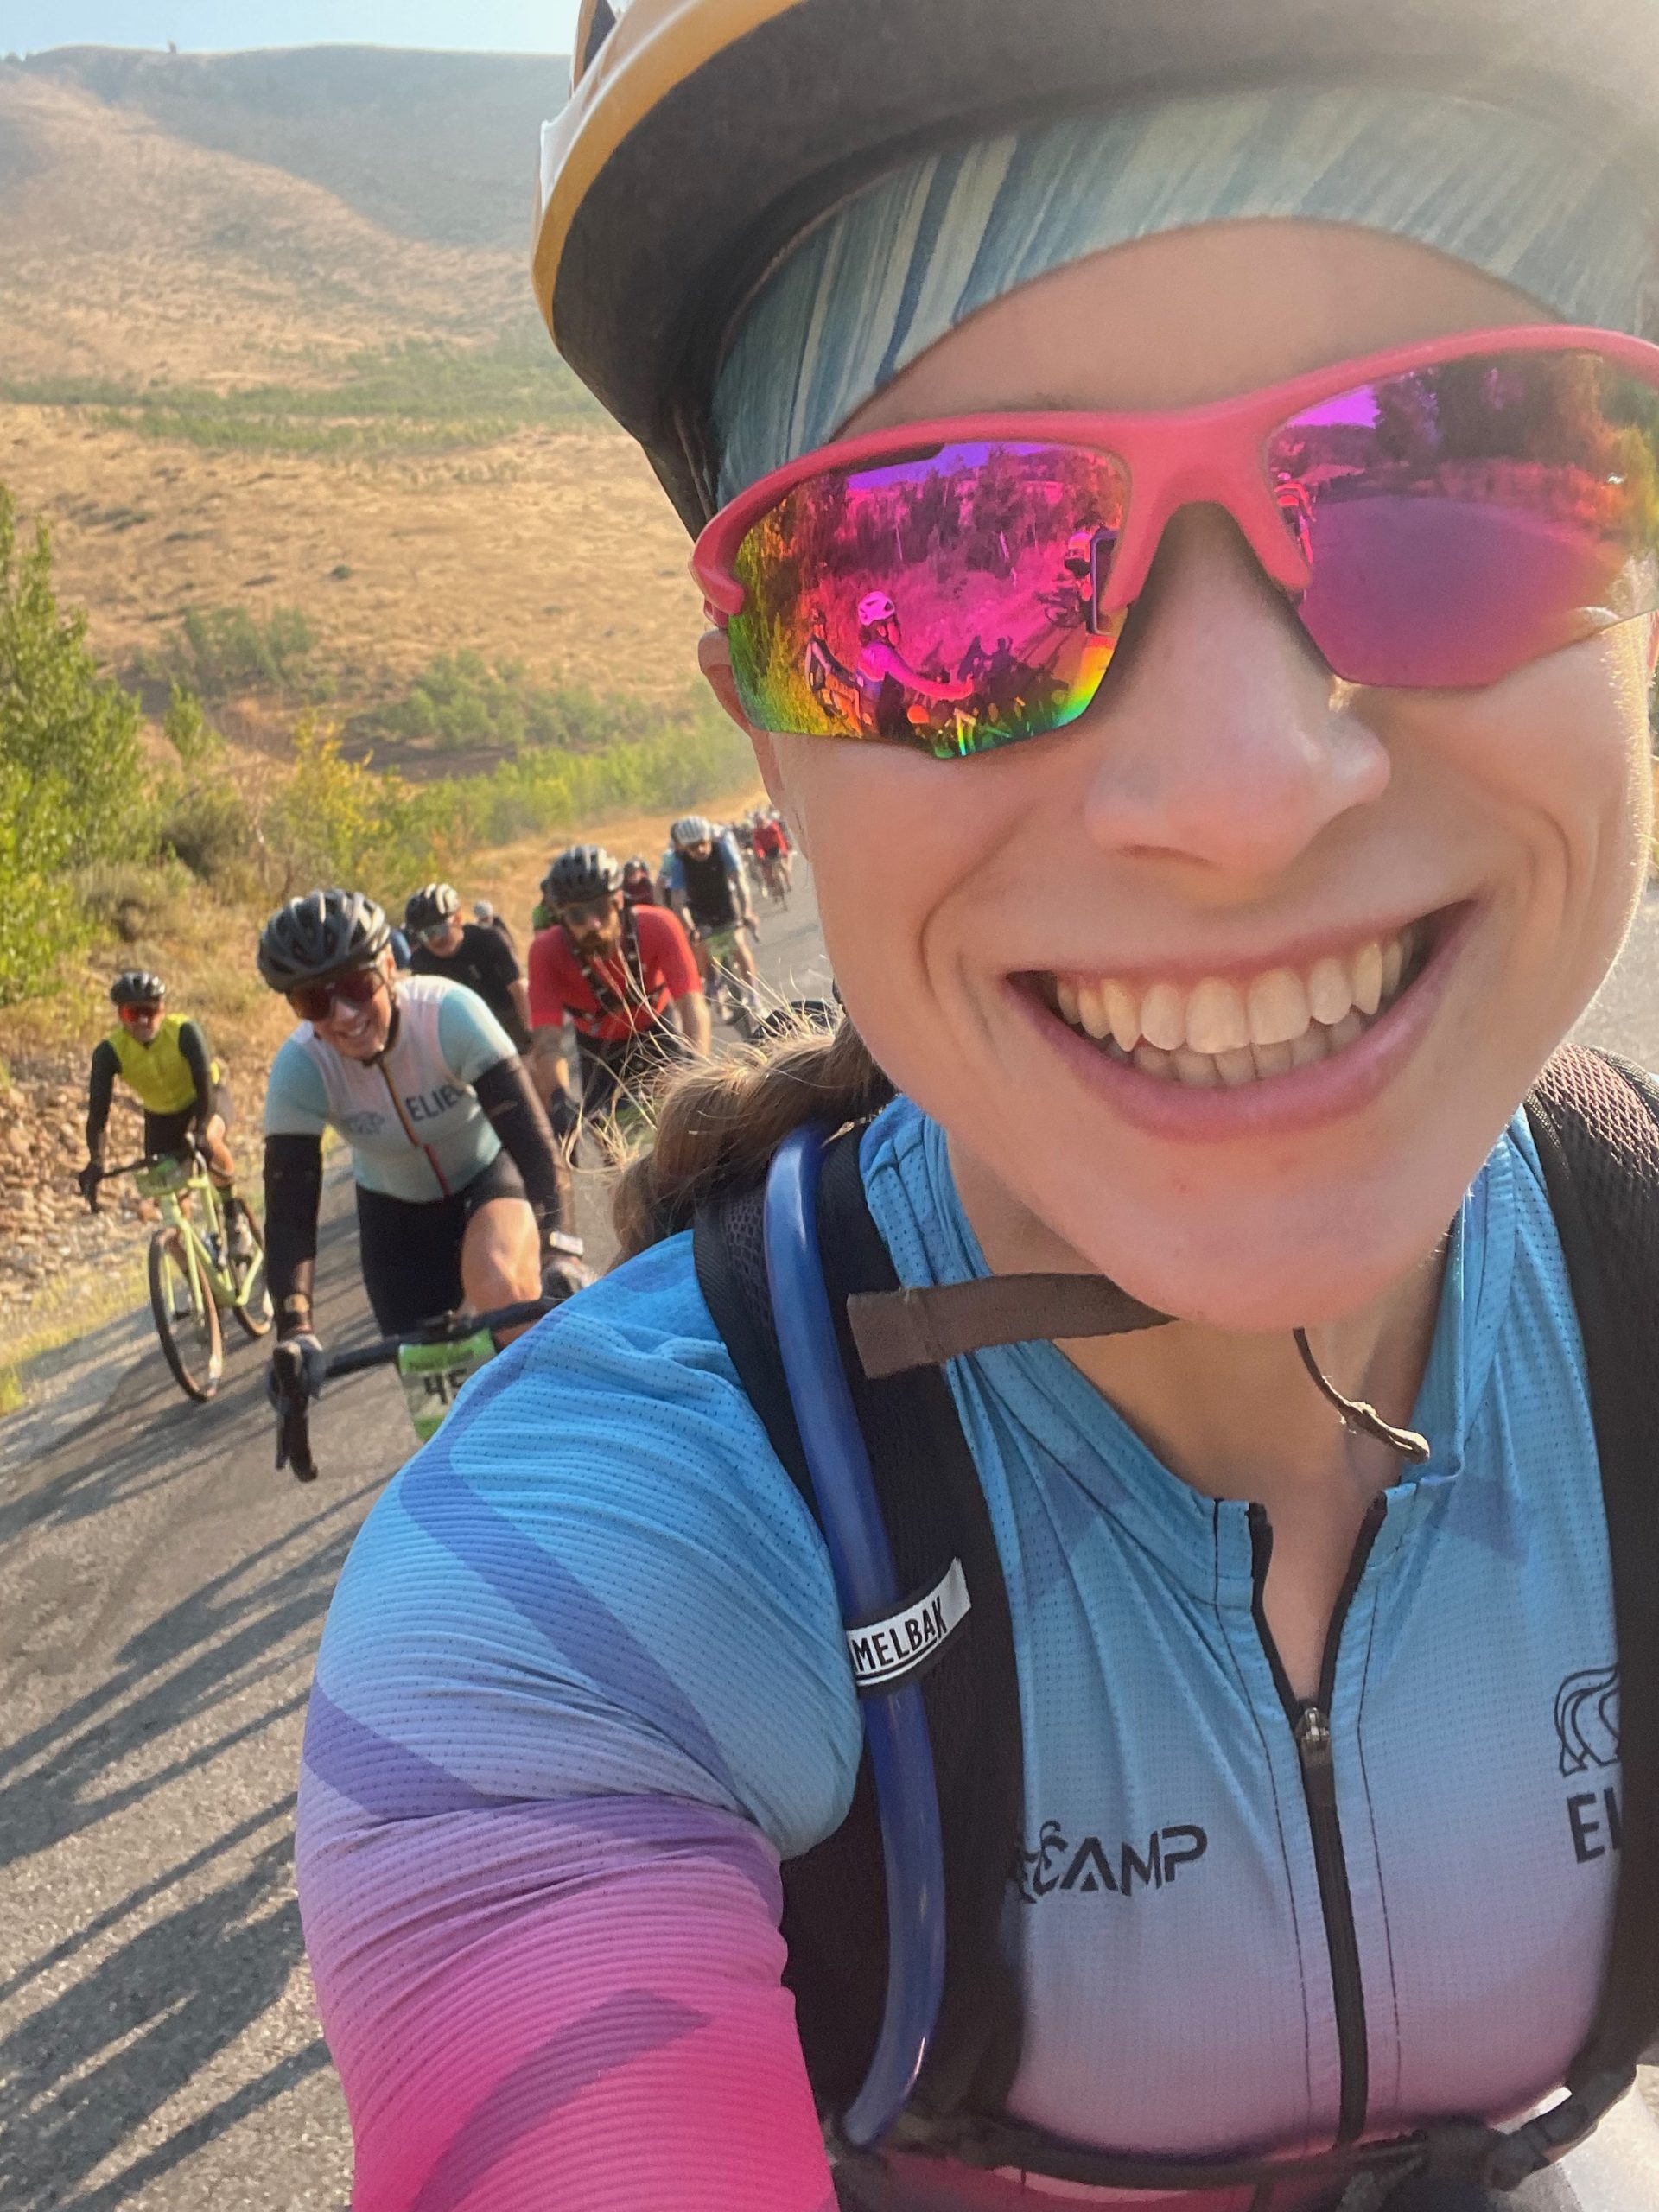 Selfie of woman on a bike with a line of riders behind her in early morning light